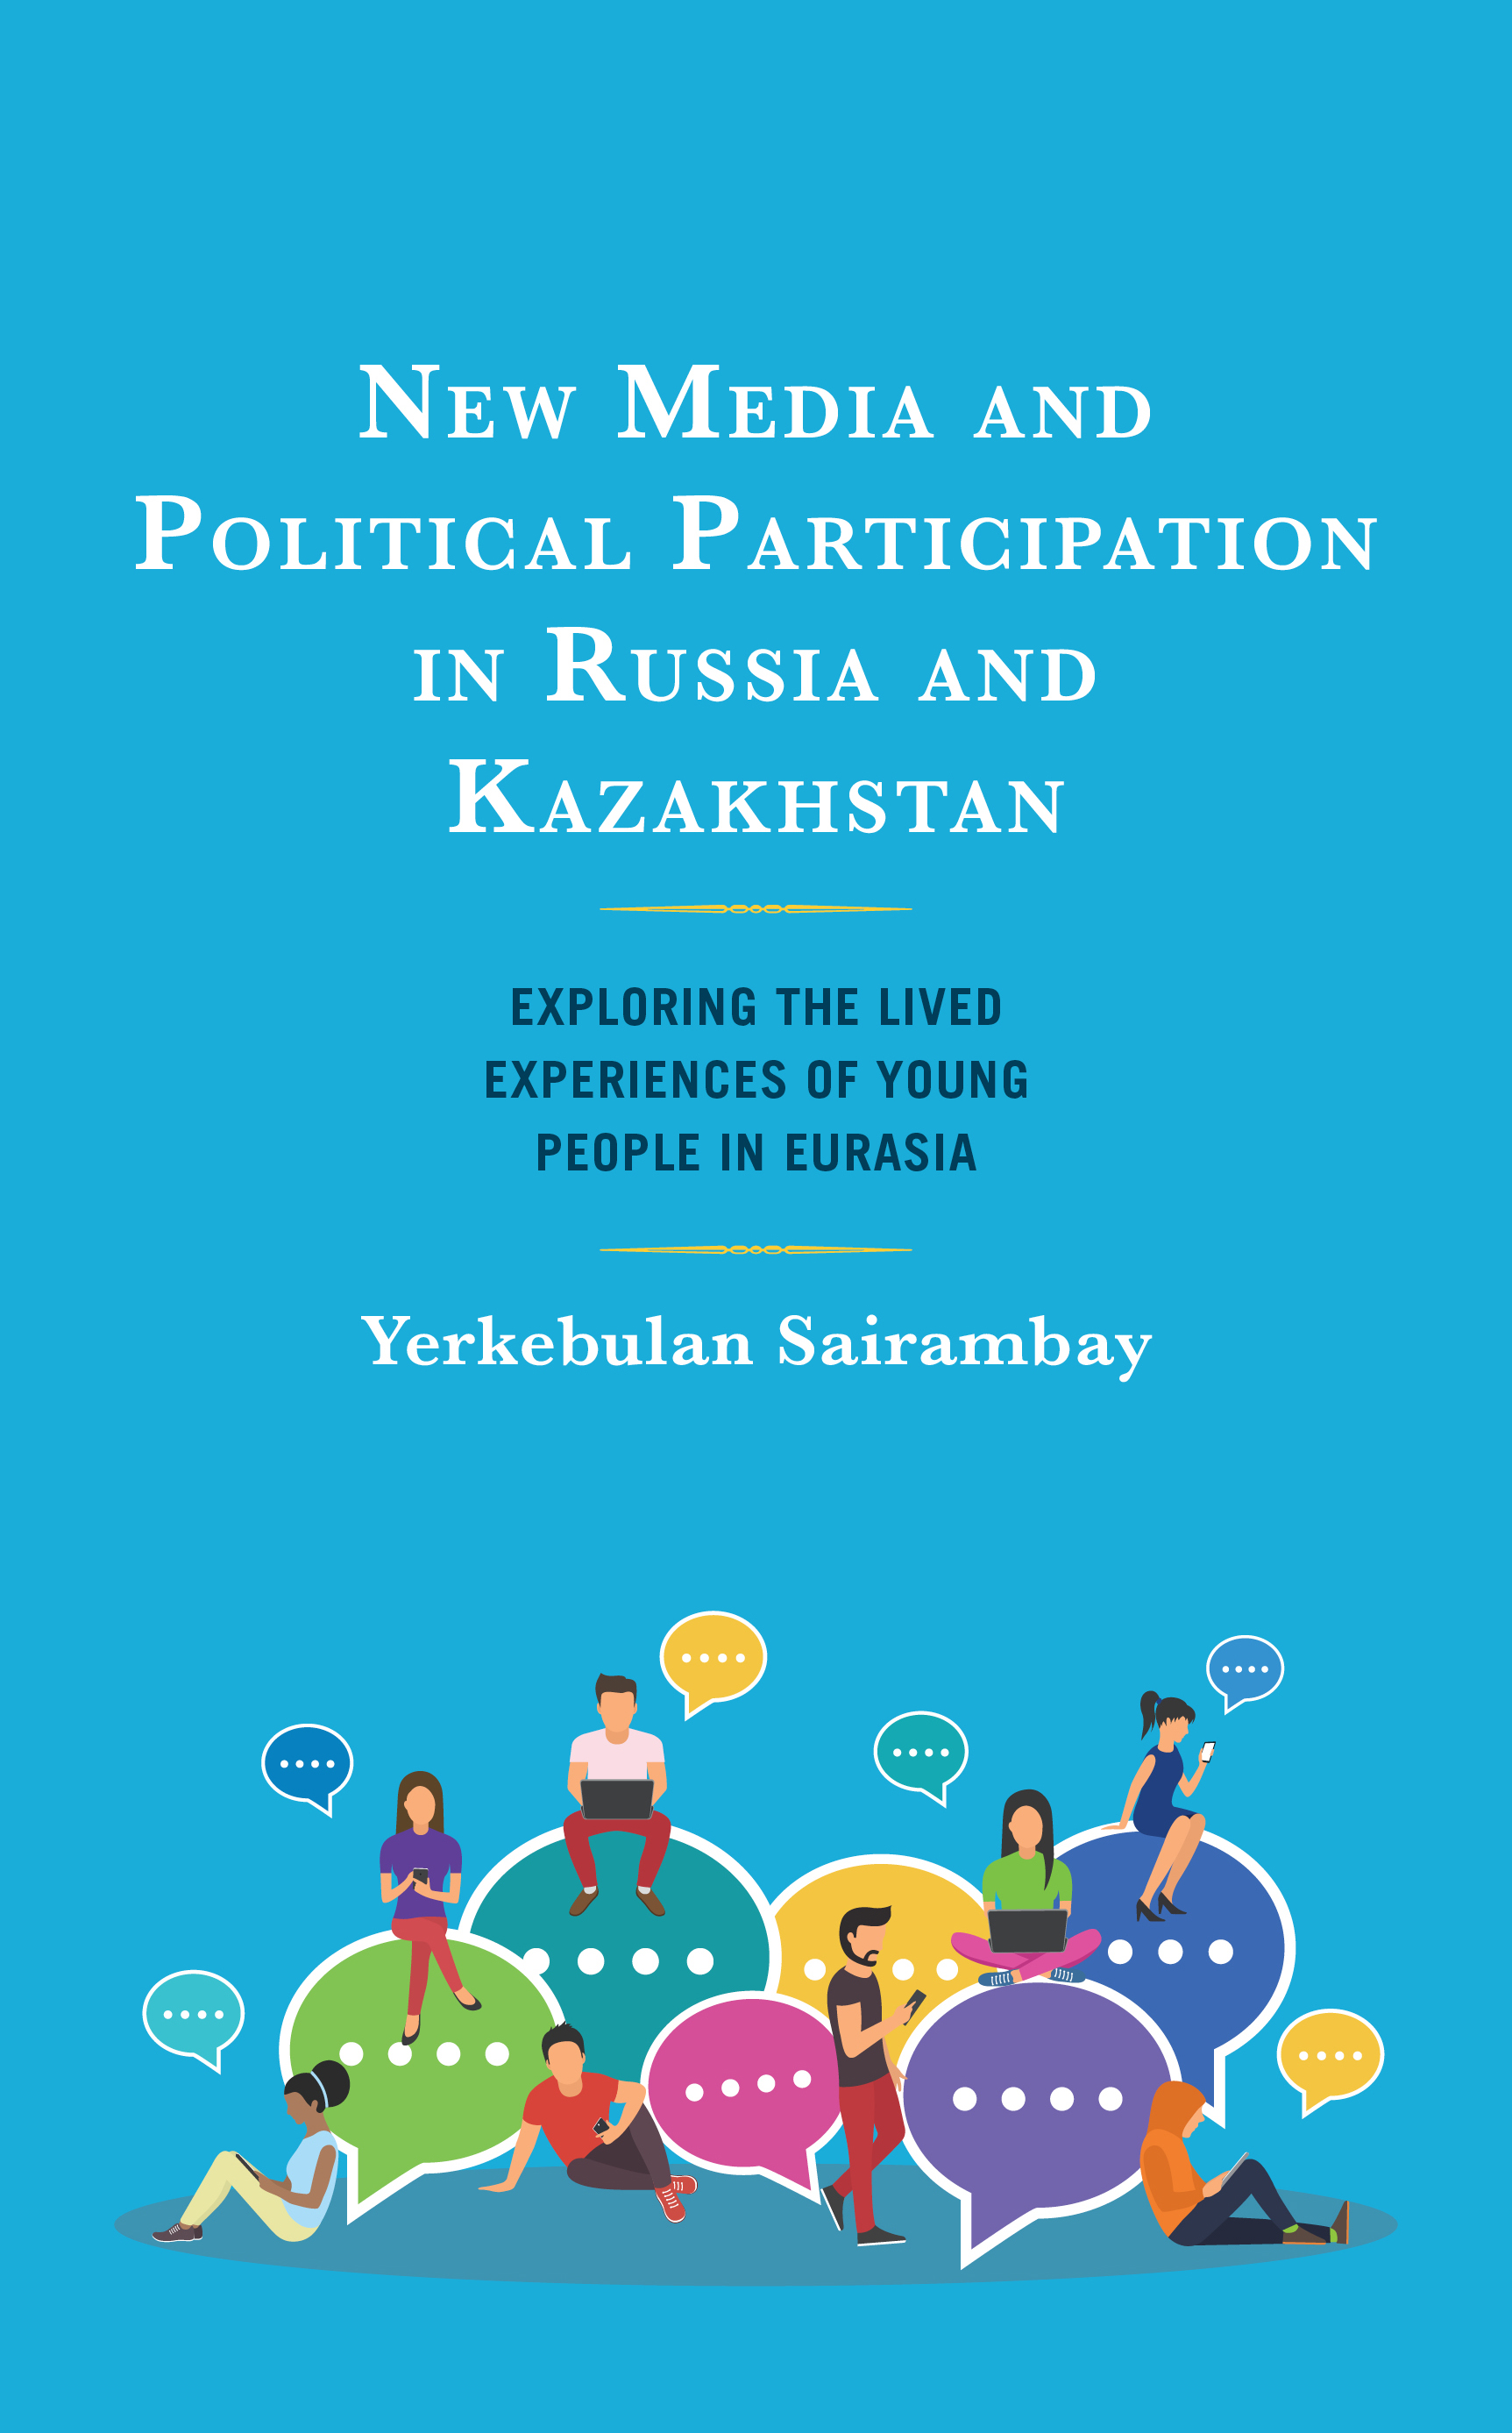 New Media and Political Participation in Russia and Kazakhstan: Exploring the Lived Experiences of Young People in Eurasia